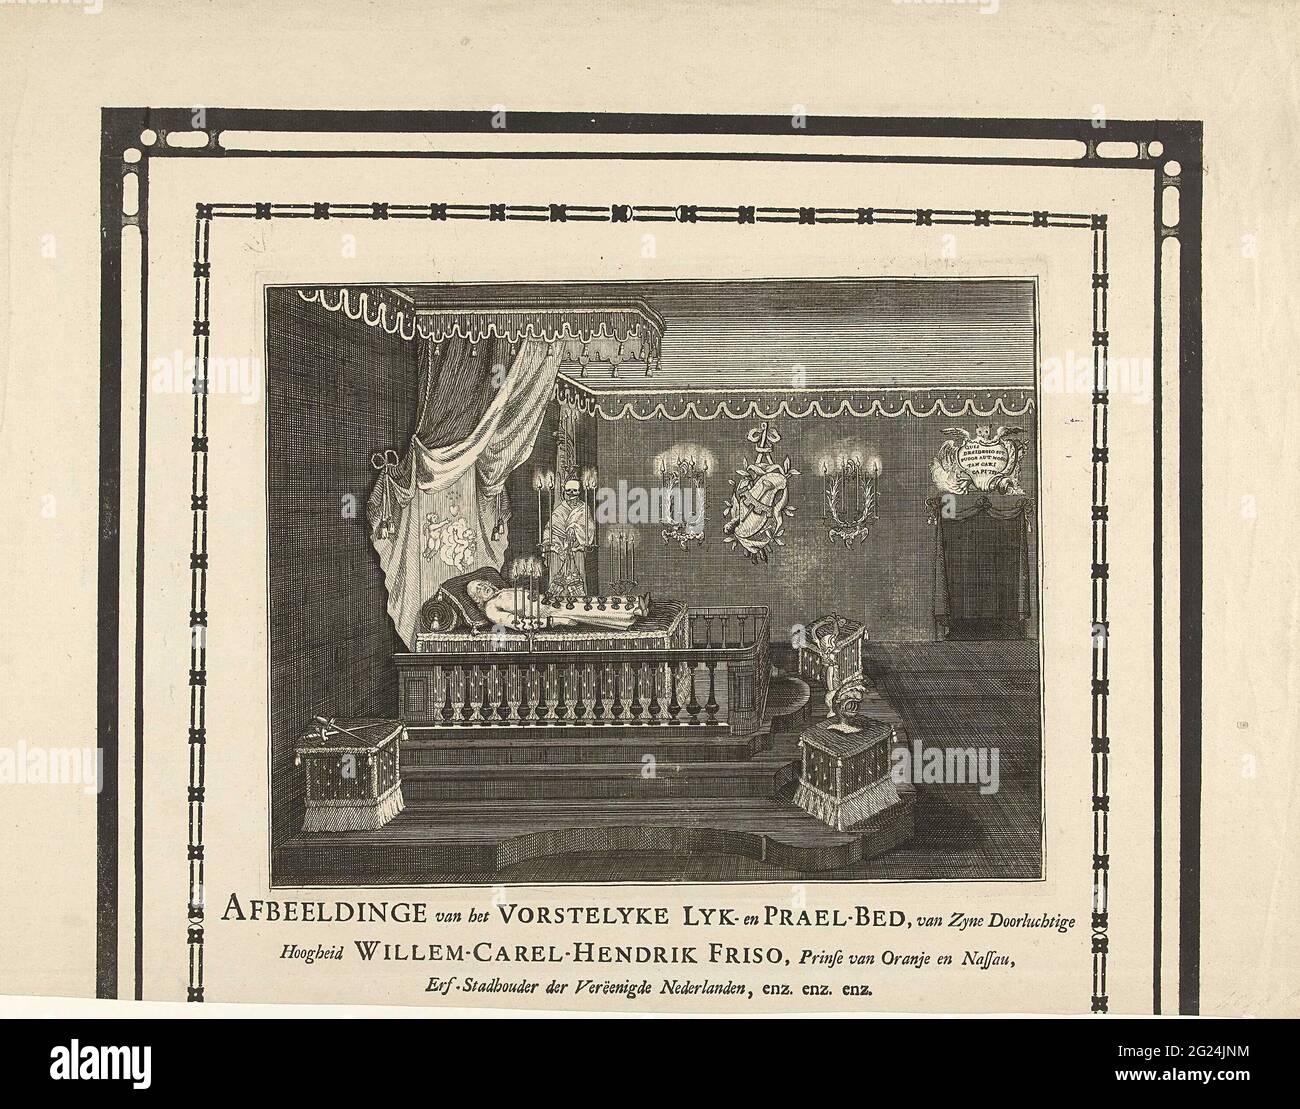 Pre-bed of Prince Willem IV, 1751; Image of the Vortelyke Lyk and Prael bed, from Zyne Scratchy Highness Willem-Carel-Hendrik Friso, Princise of Orange and Nassau (...). Funeral room with the praal bed of the Prince Willem IV prince was died on October 22 and to which he has been laid down by 1751 during the months of November and December. With black mourning edges around the plate, cut off at the bottom, making it fresh and the lower funeral edge. Stock Photo